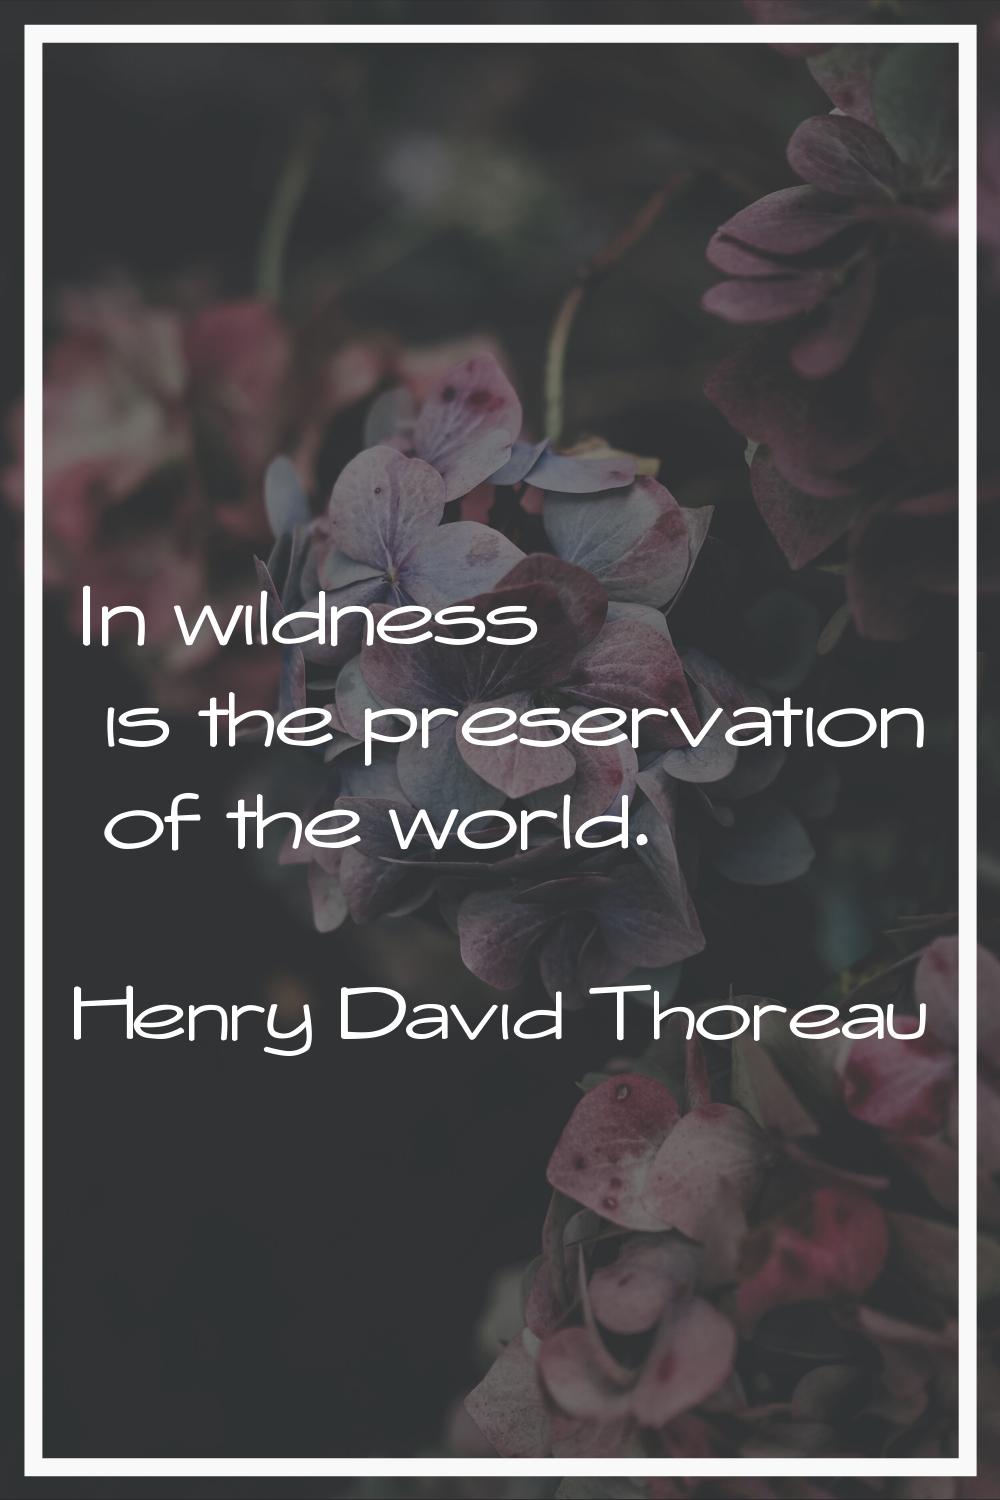 In wildness is the preservation of the world.